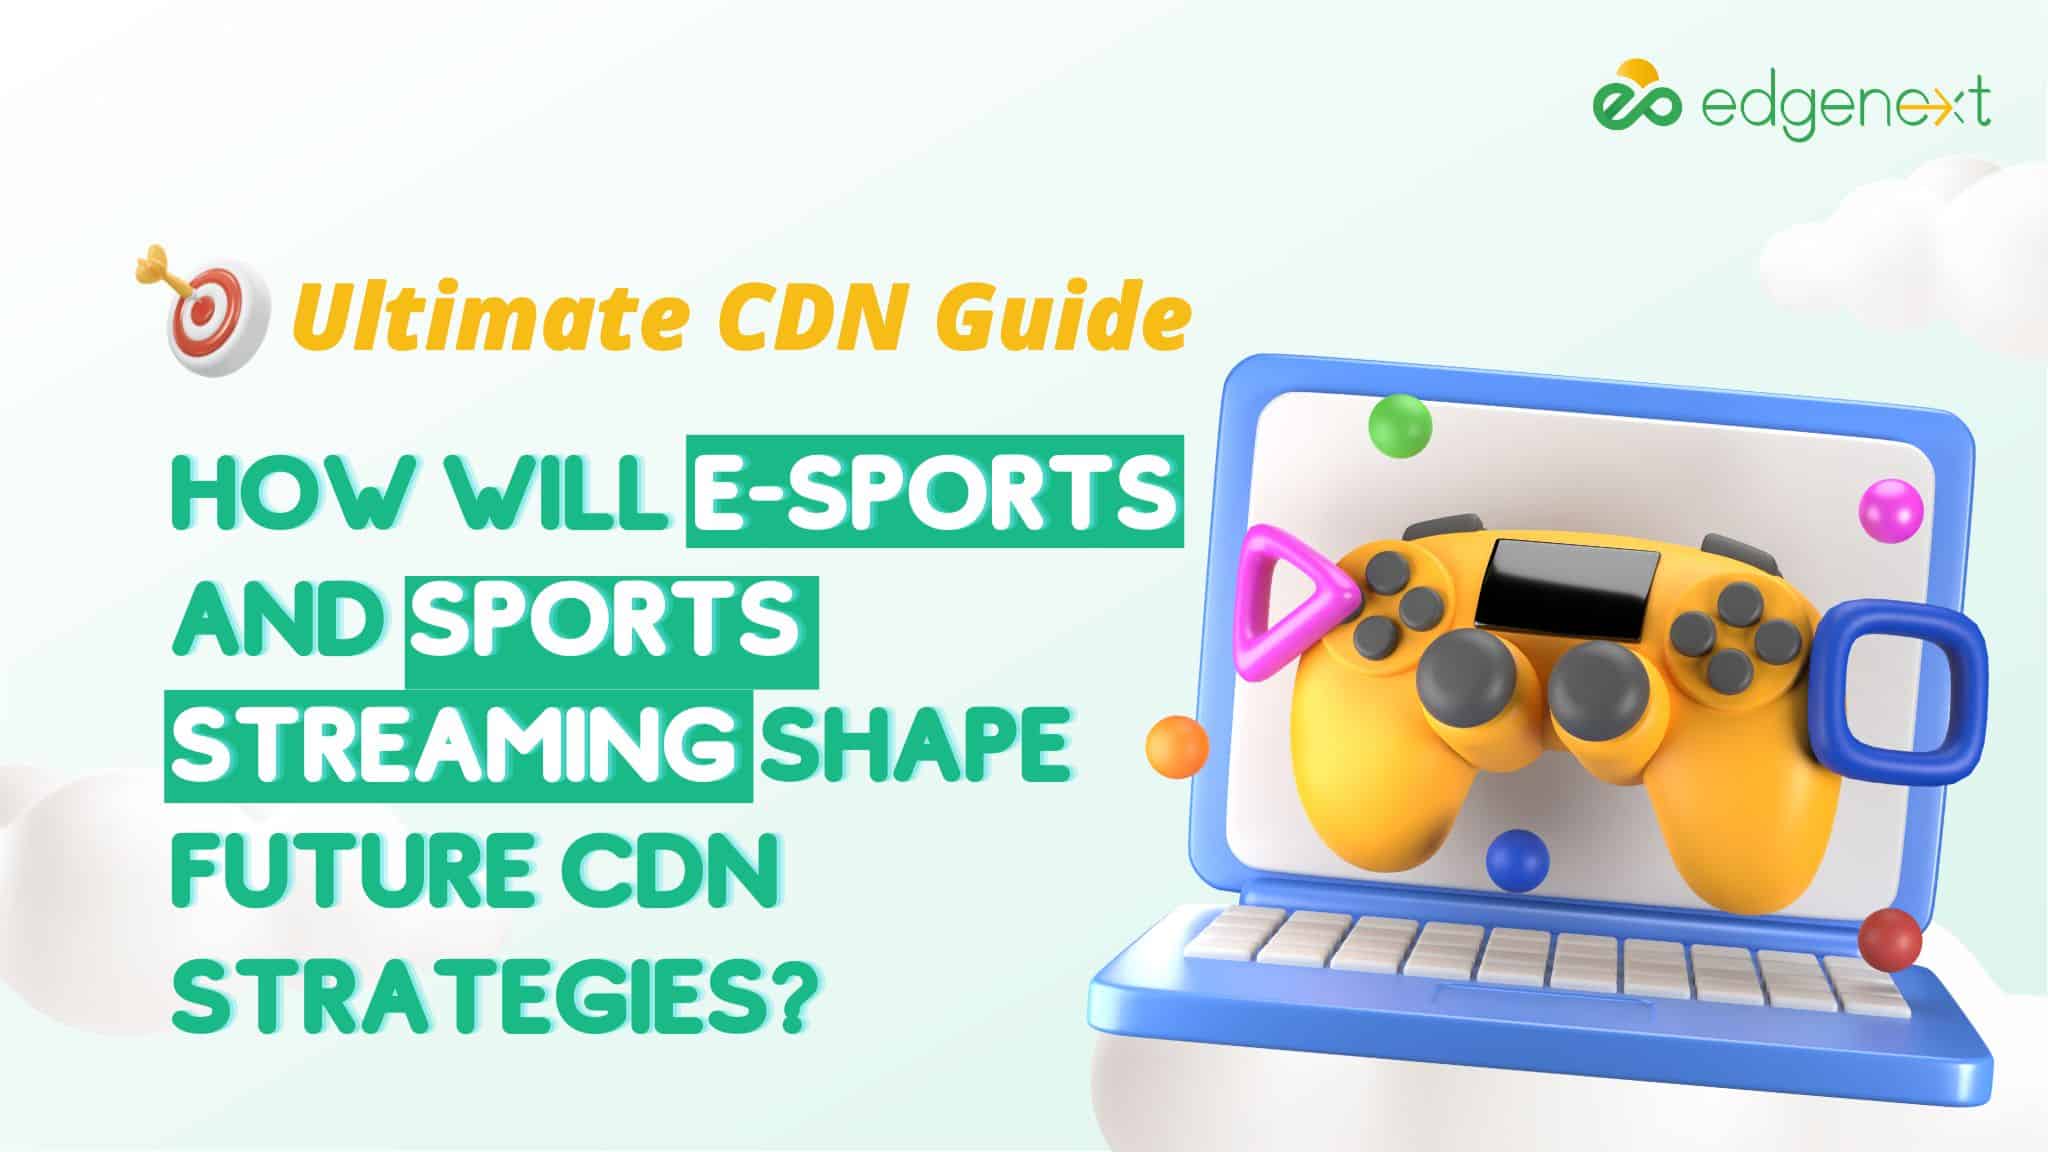 How will e-sports and sports streaming shape future CDN strategies? 